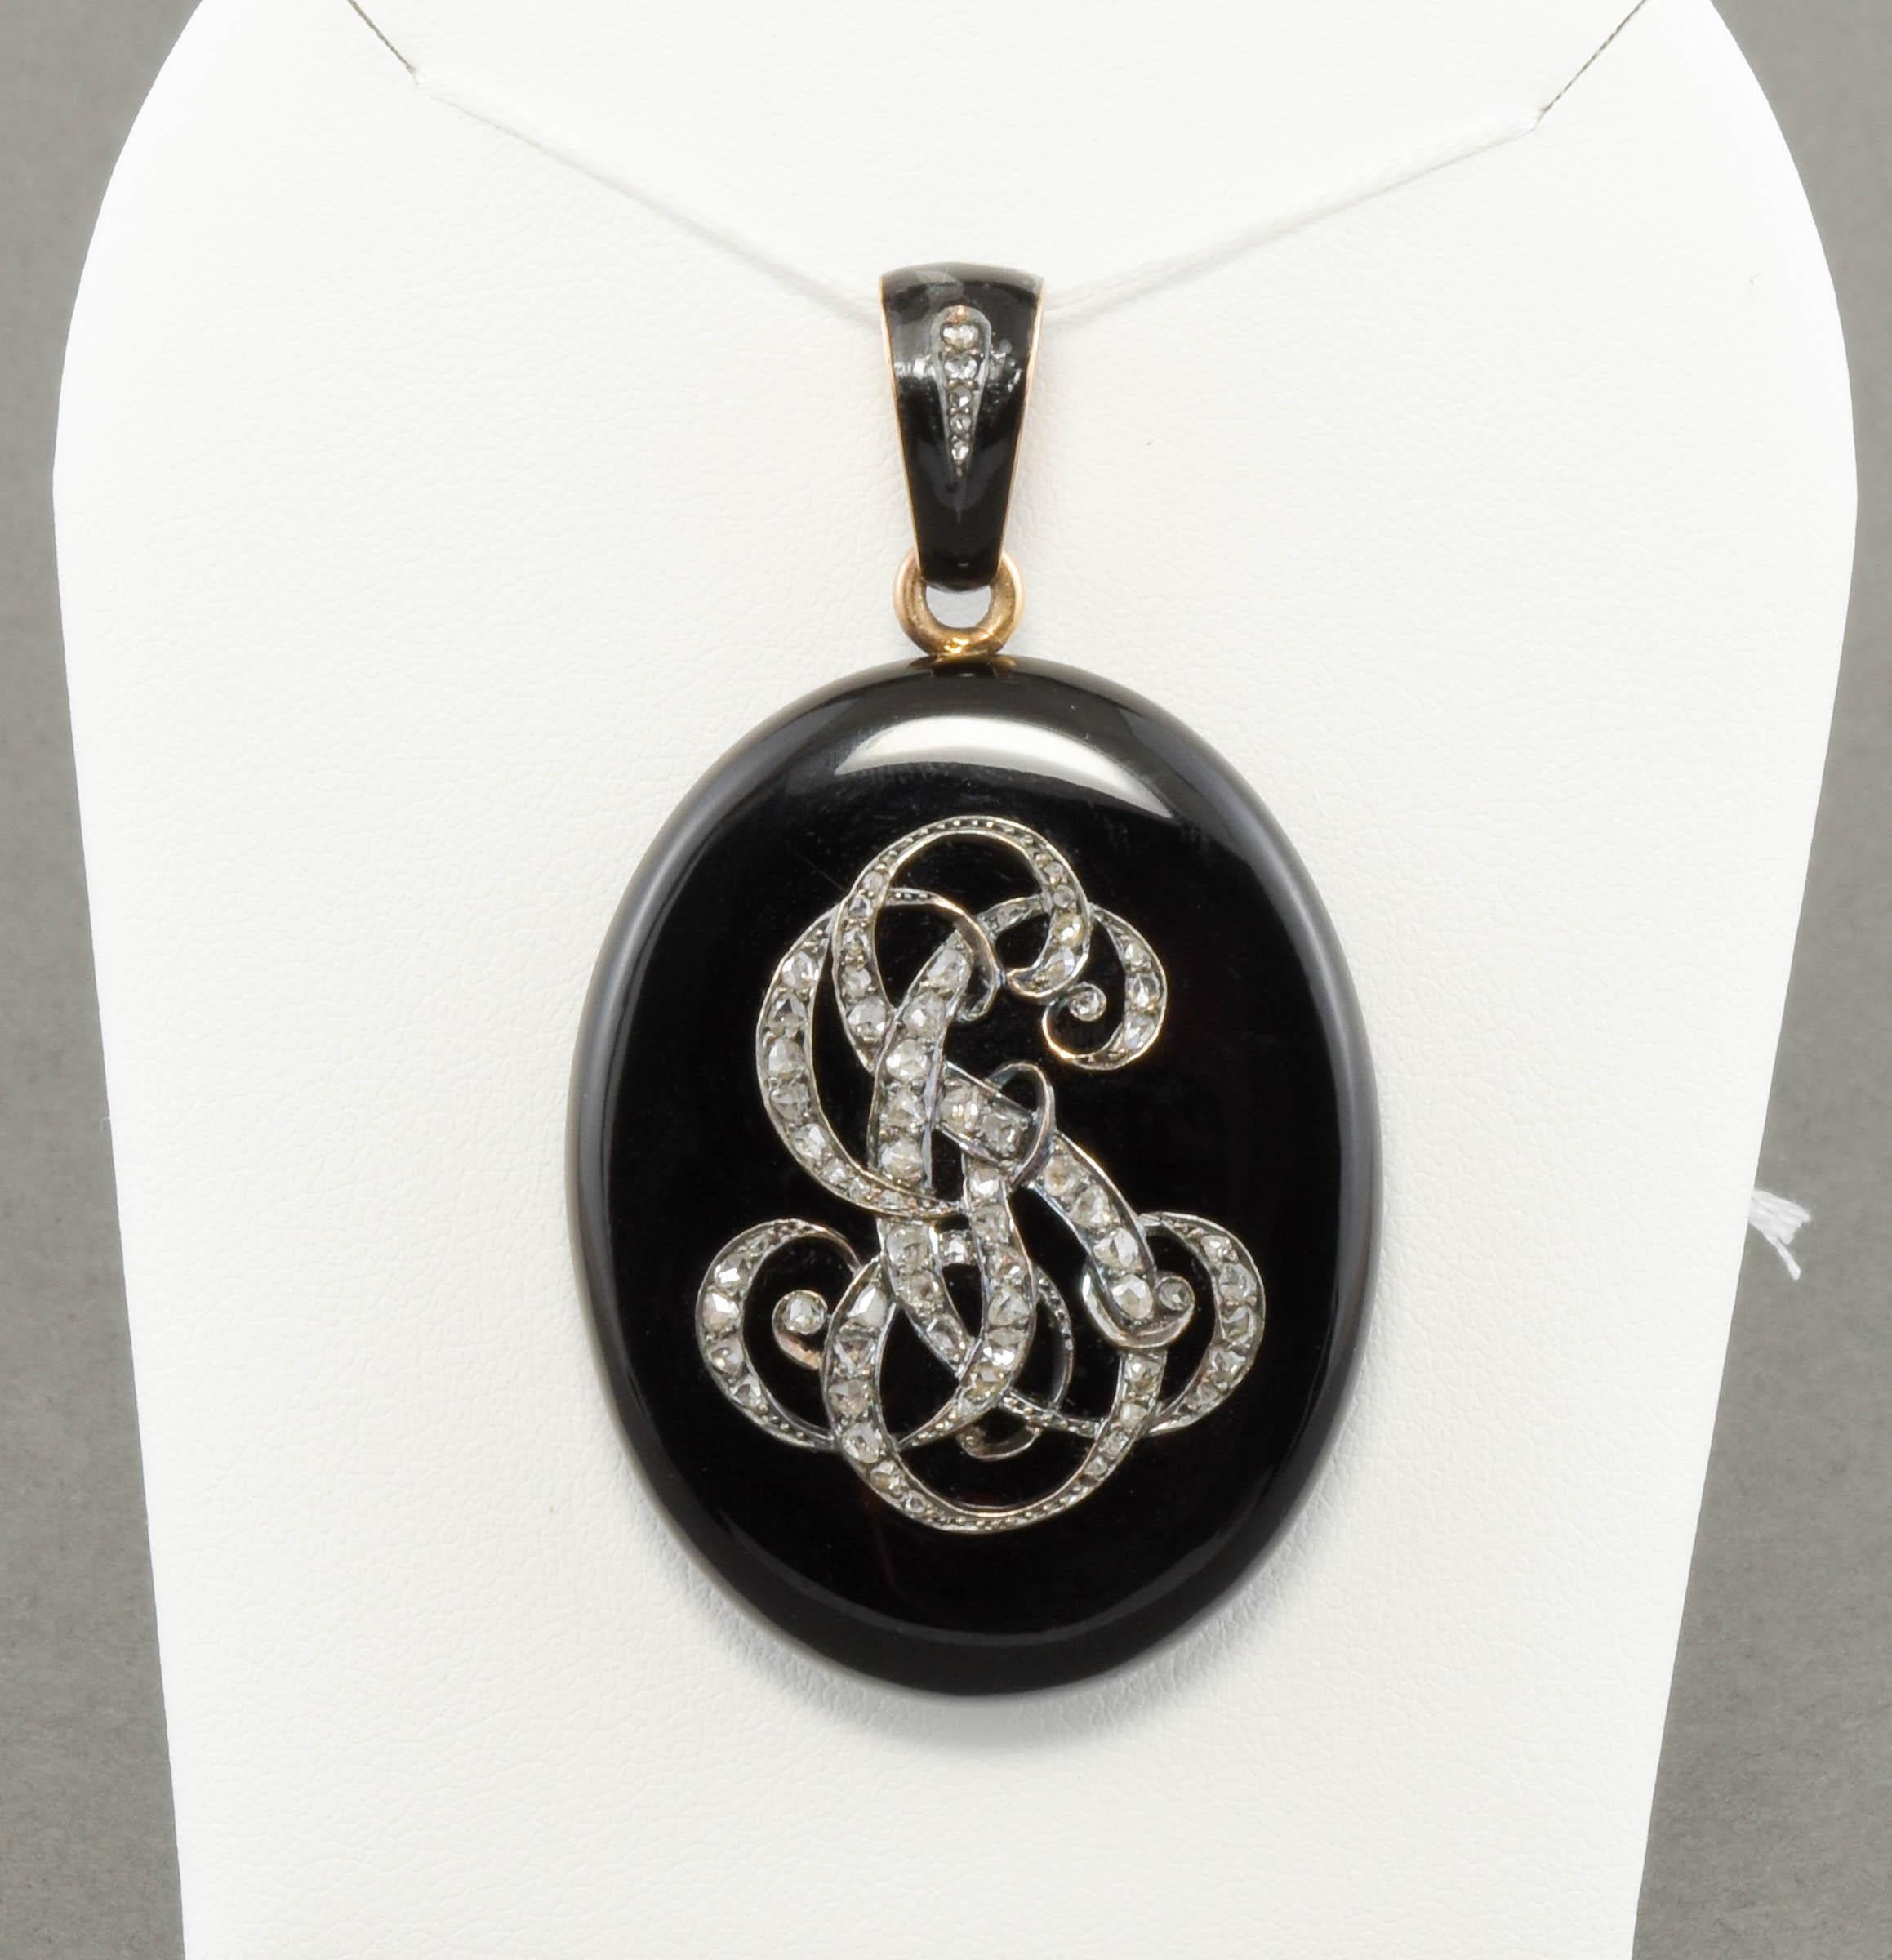 This superb Victorian period locket is carved from a solid piece of glossy black onyx with an applied gold & silver monogram of three initials set with very sparkly old rose cut diamonds.  The reverse has a glazed compartment to hold a cherished